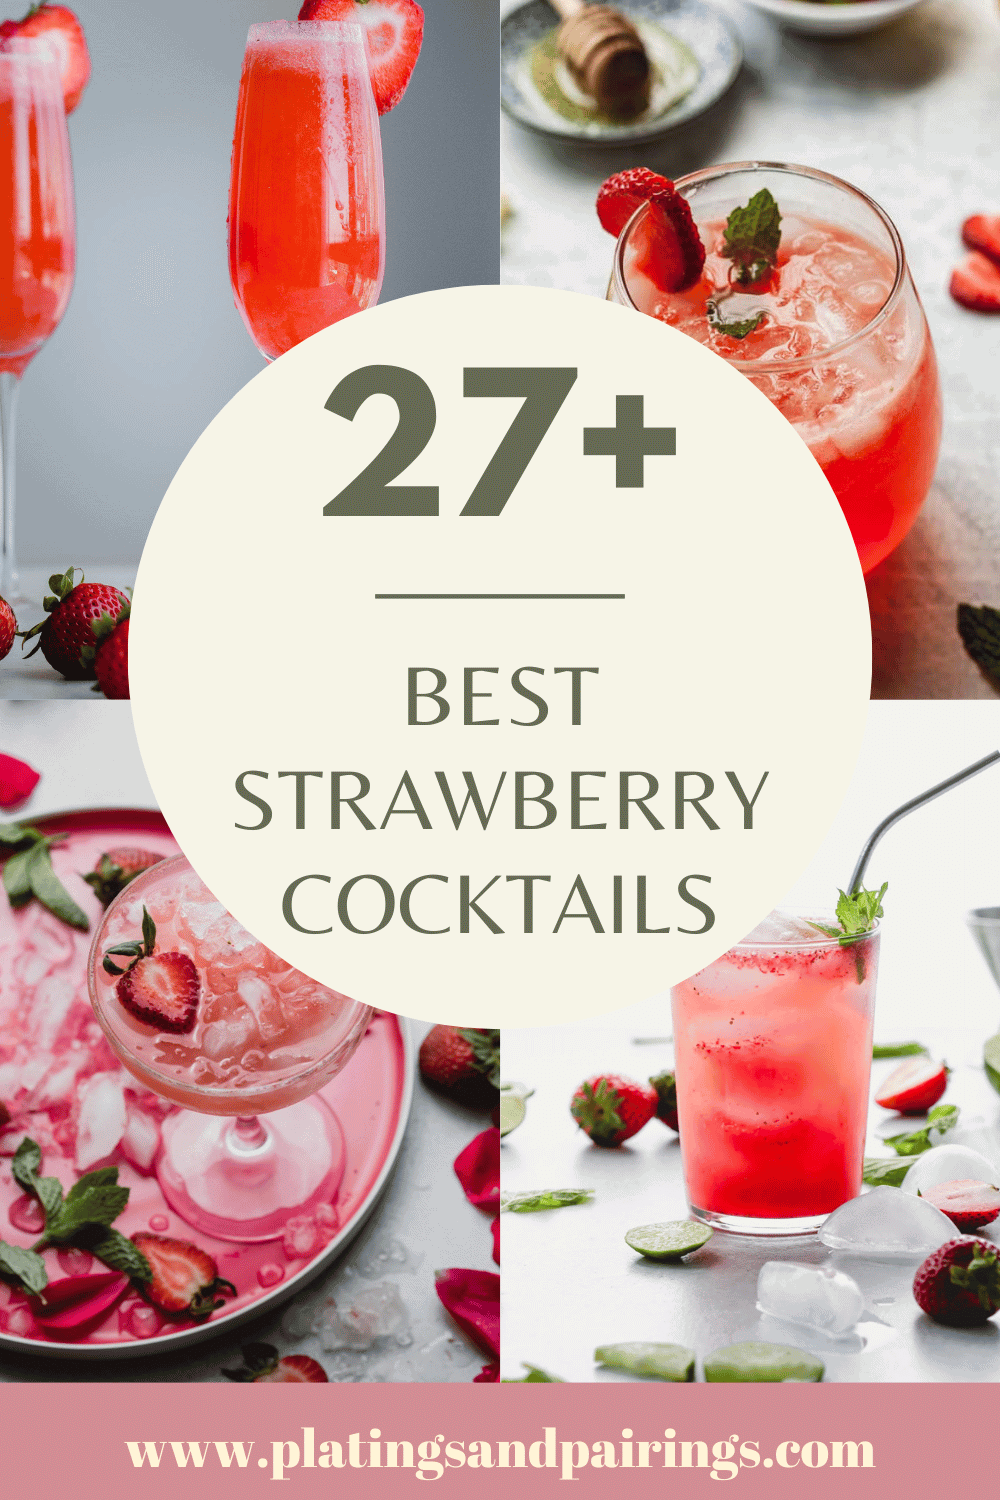 Collage of strawberry cocktails with text overlay.